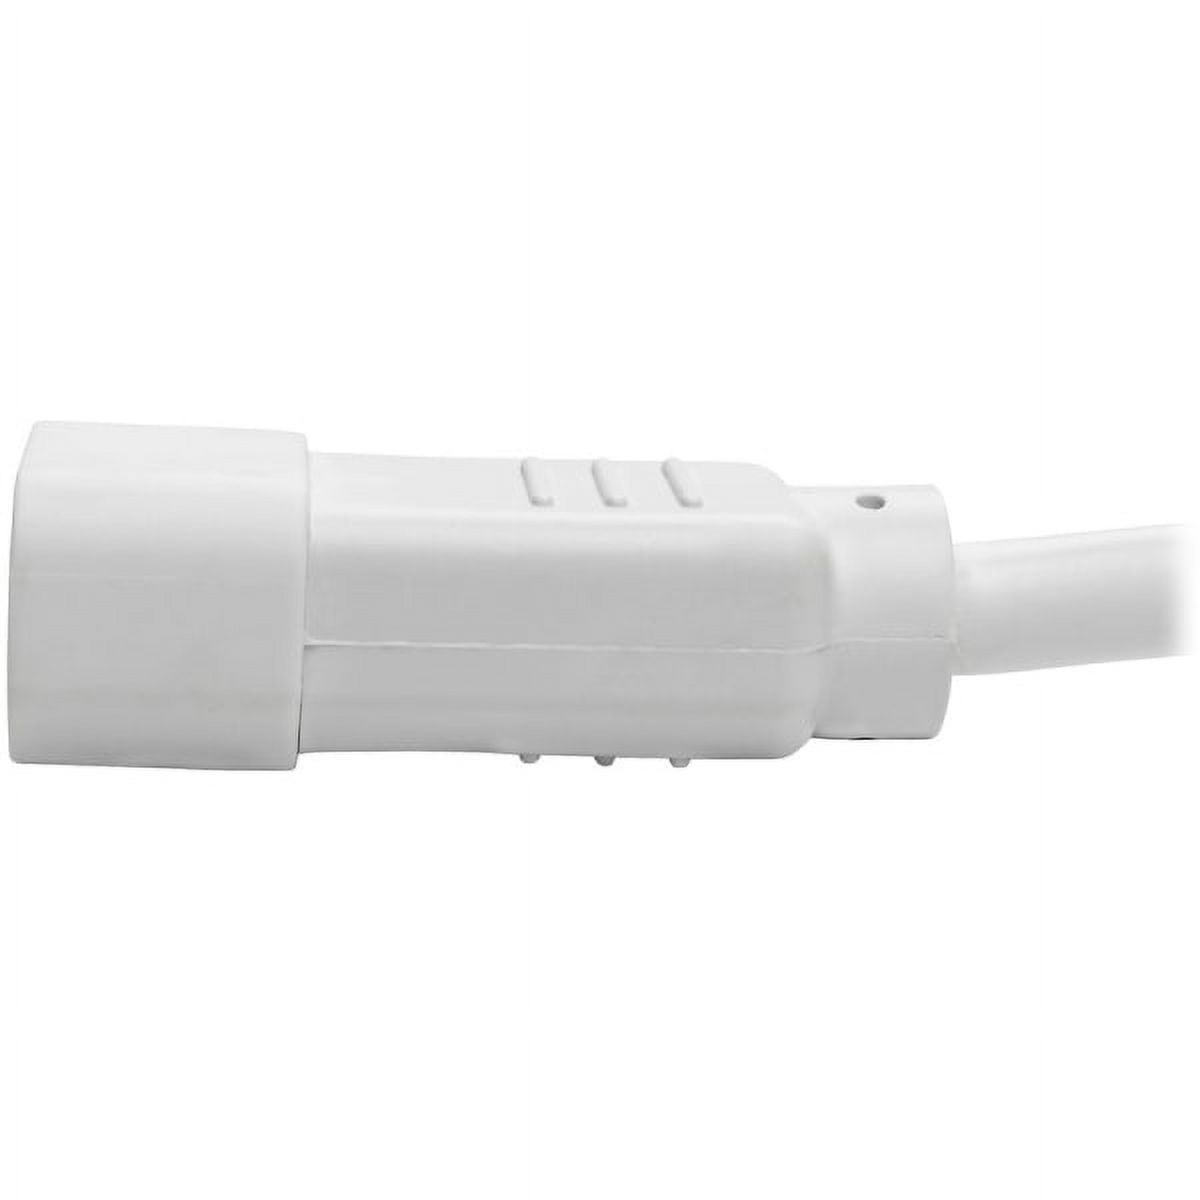 Eaton Tripp Lite Series Heavy-Duty PDU Power Cord, C13 to C14 - 15A, 250V, 14 AWG, 6 ft. (1.83 m), White - Power extension cable - IEC 60320 C14 to power IEC 60320 C13 - 6 ft - white - image 5 of 5